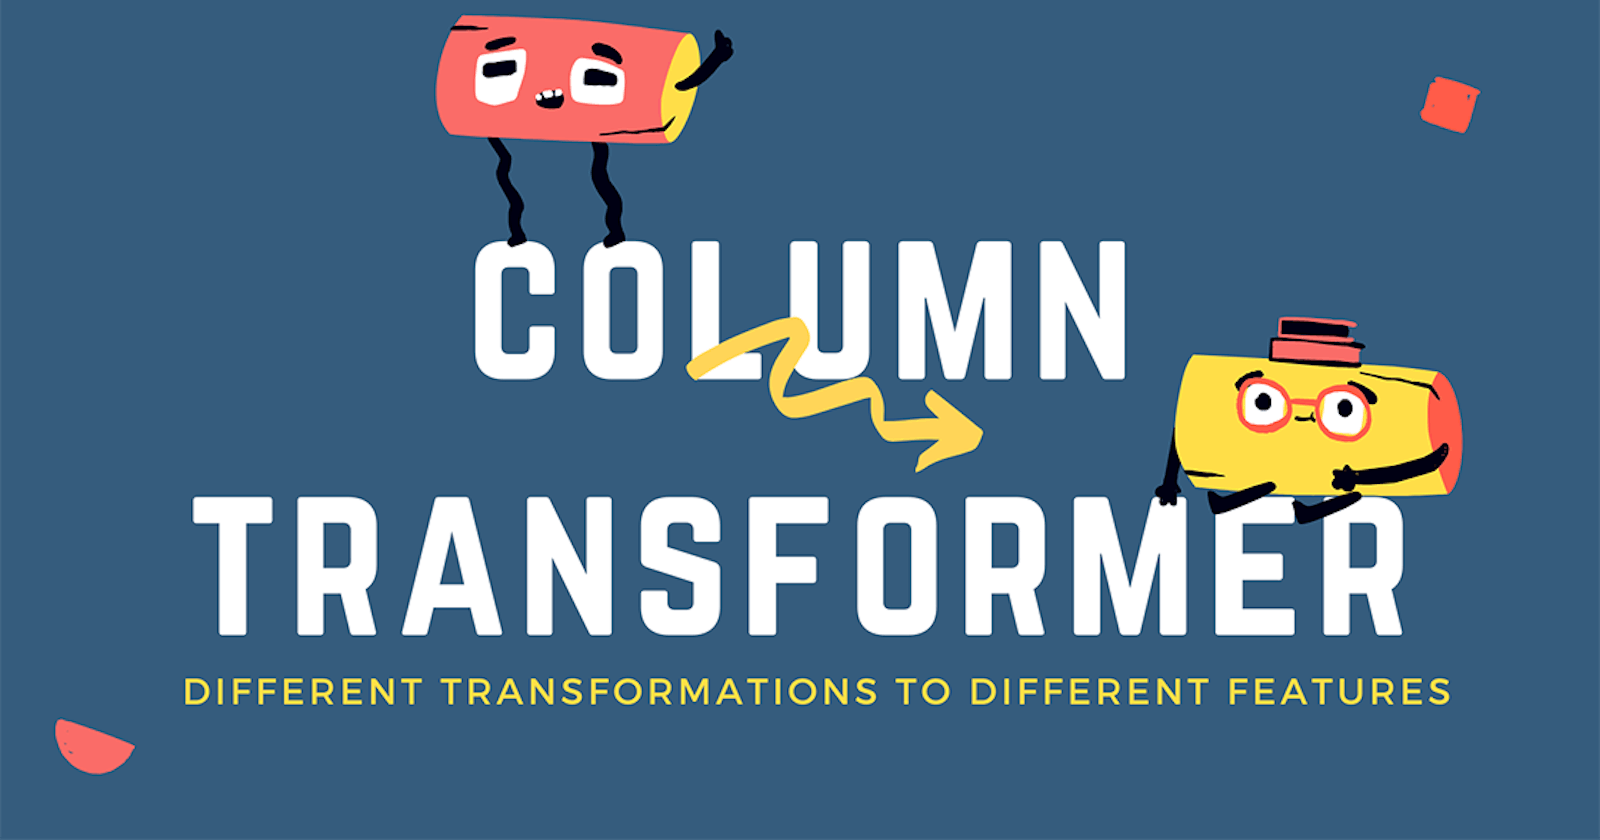 ColumnTransformer: Apply Different Transformations To Different Features